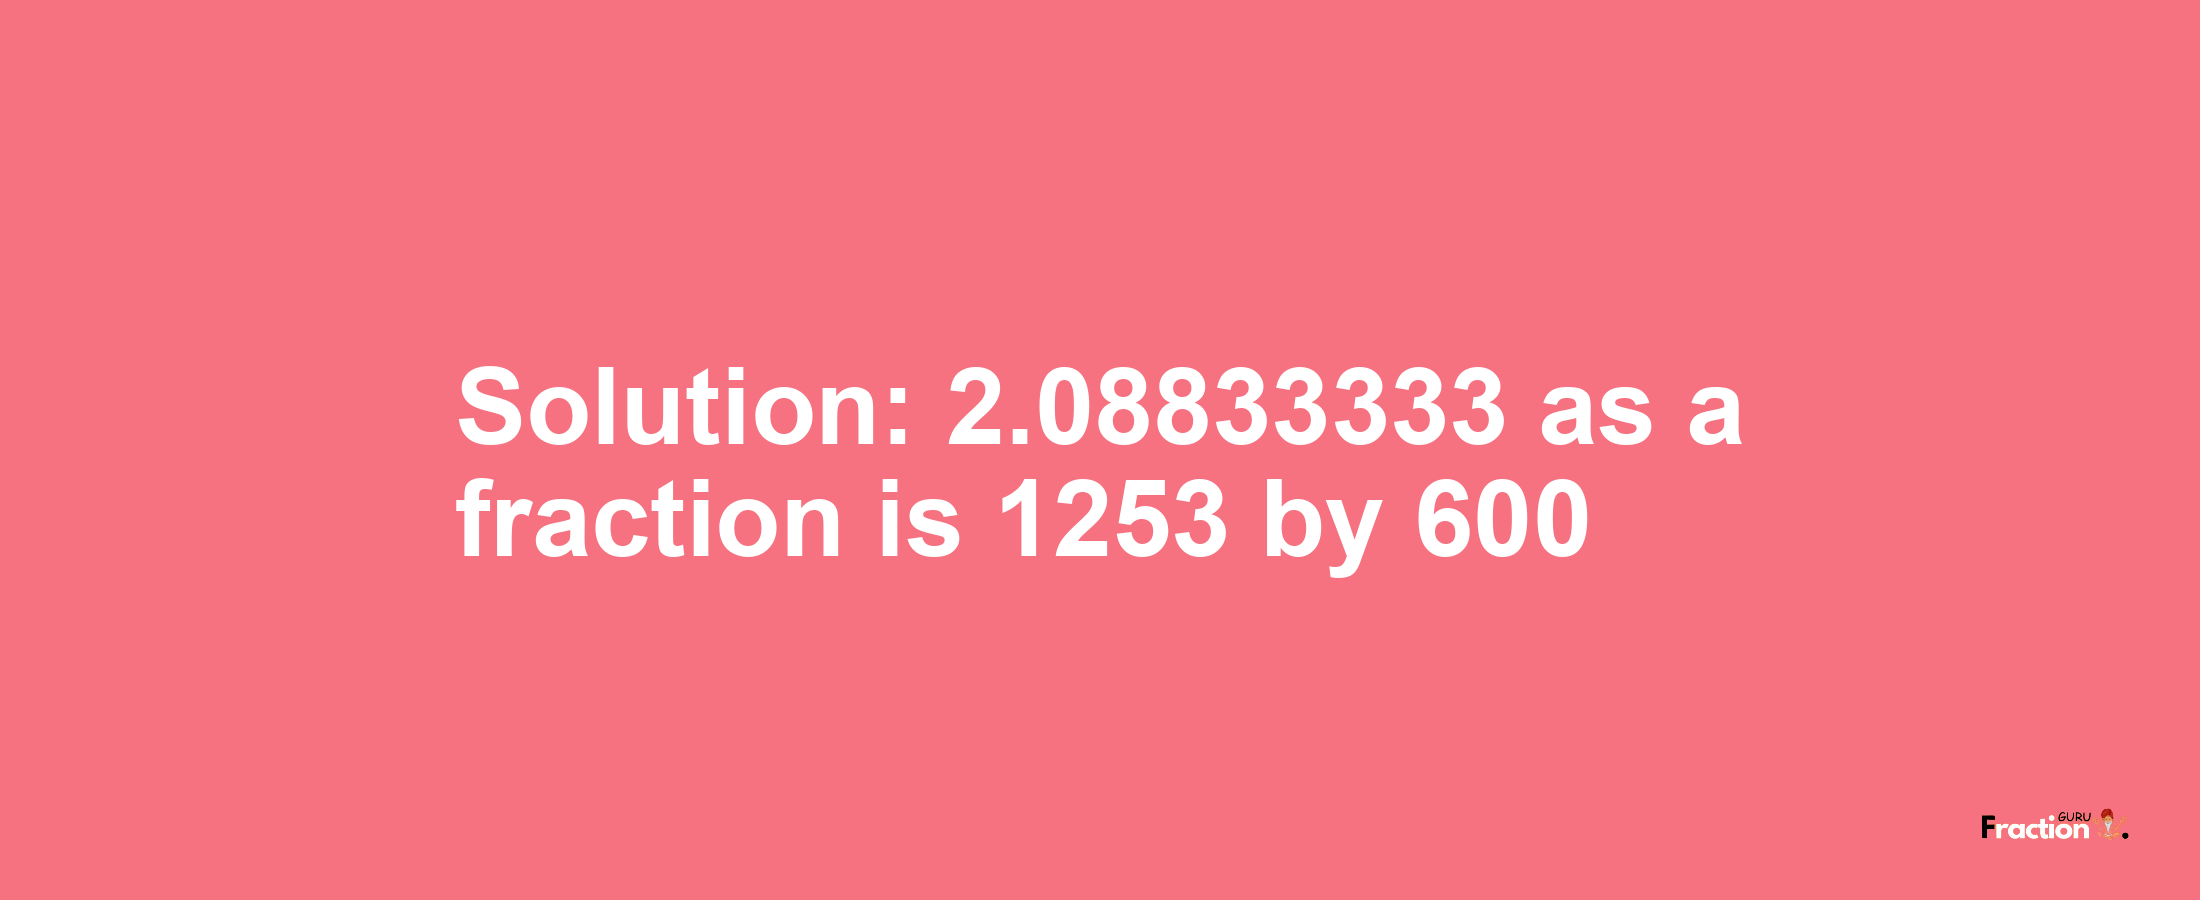 Solution:2.08833333 as a fraction is 1253/600